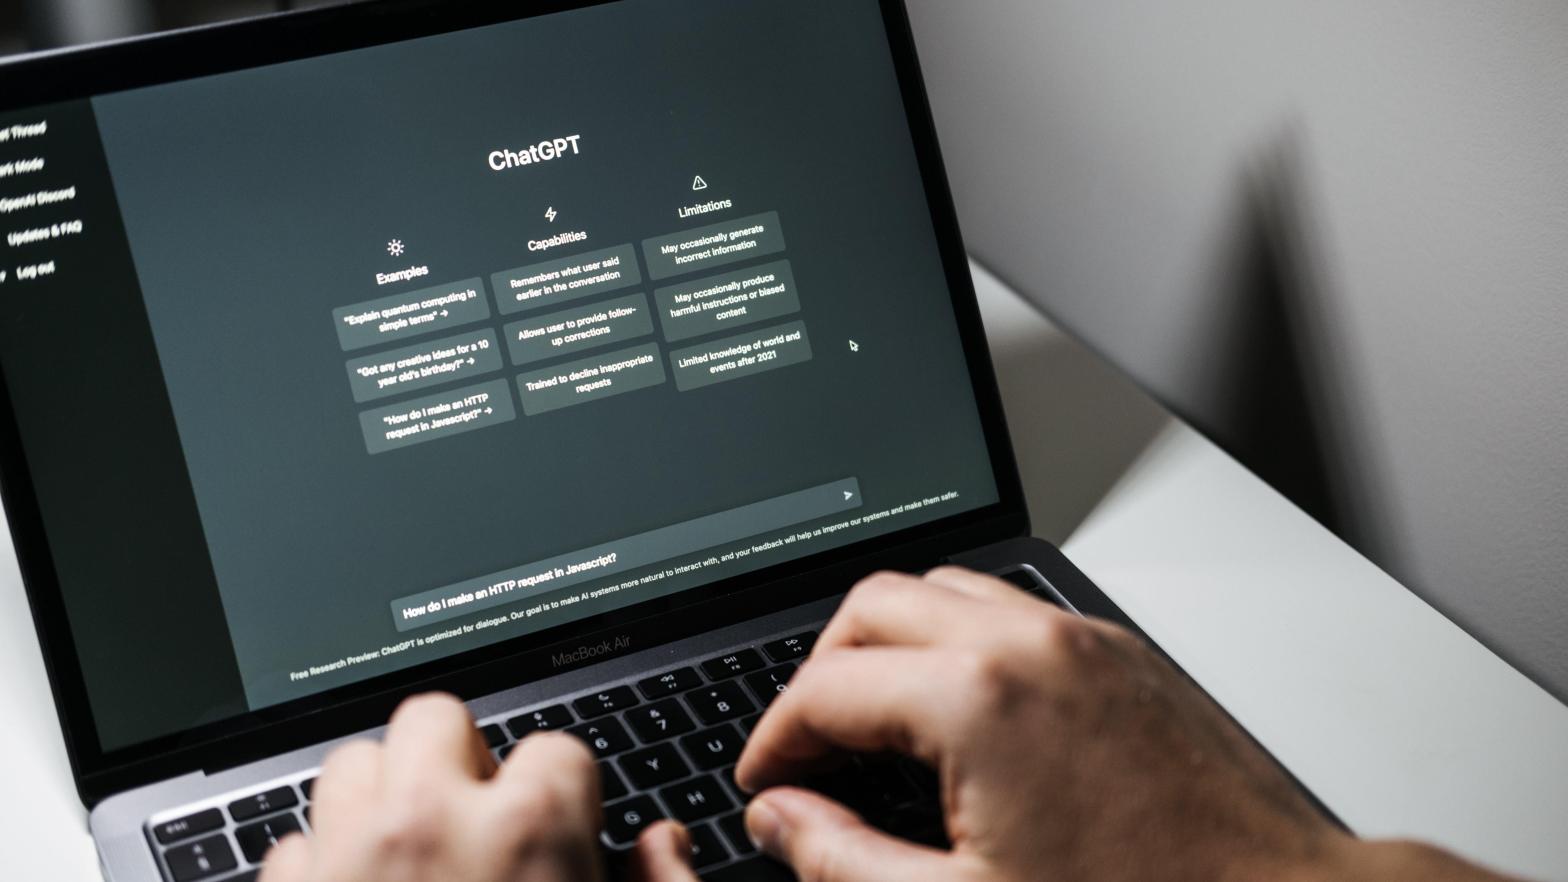 Nigam told Insider that the company's research and development team, for example, has been using ChatGPT to debug code. (Image: Iryna Imago, Shutterstock)